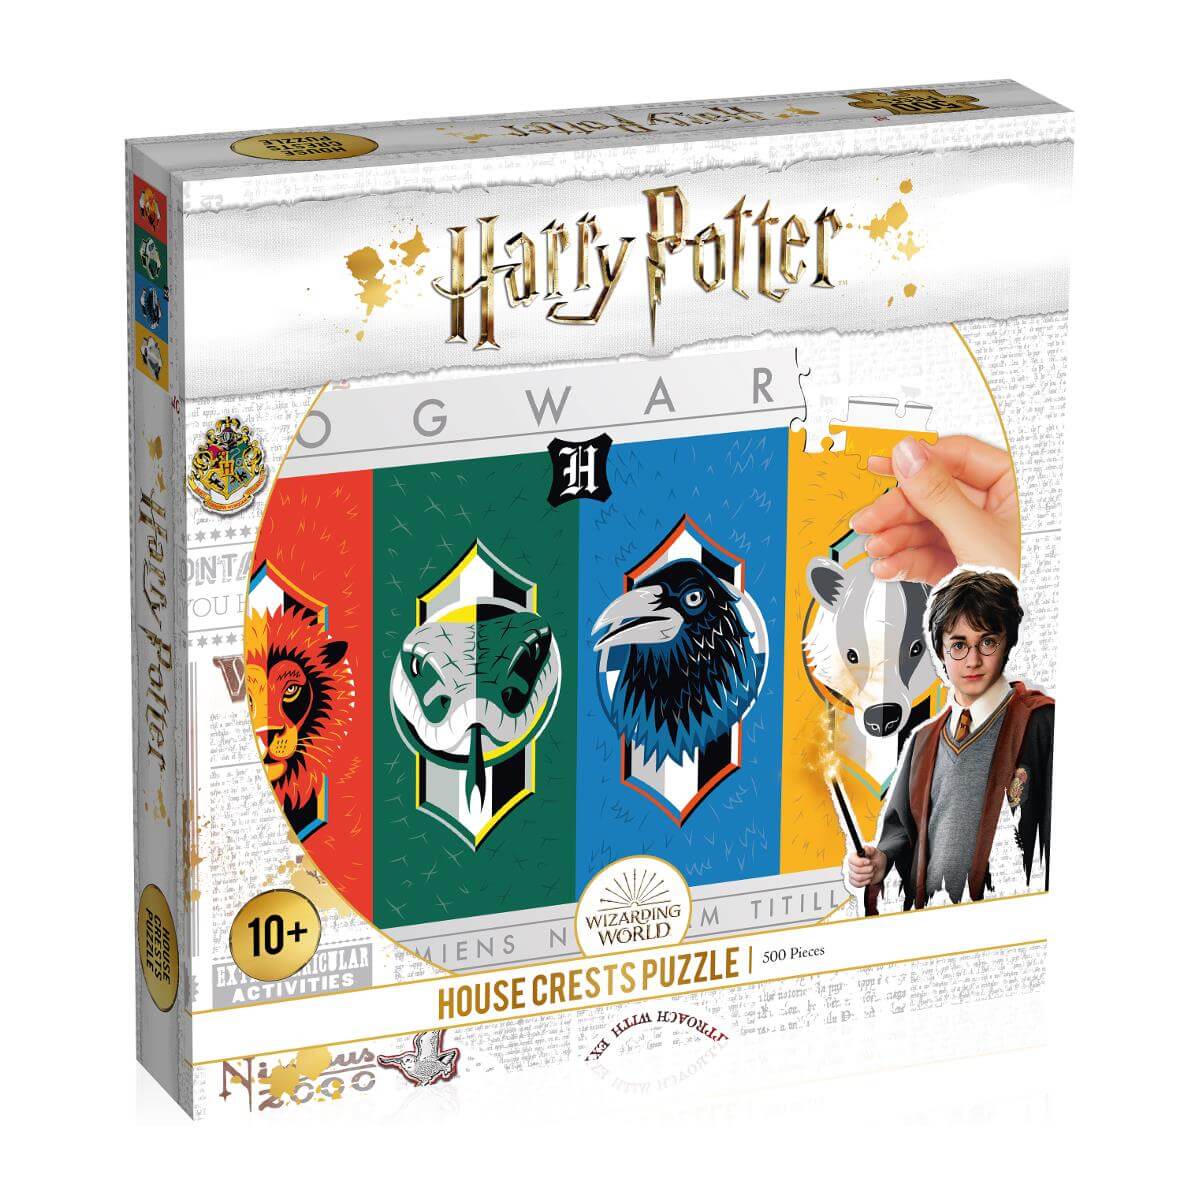 Harry Potter House Crests Jigsaw Puzzle - Loaded Dice